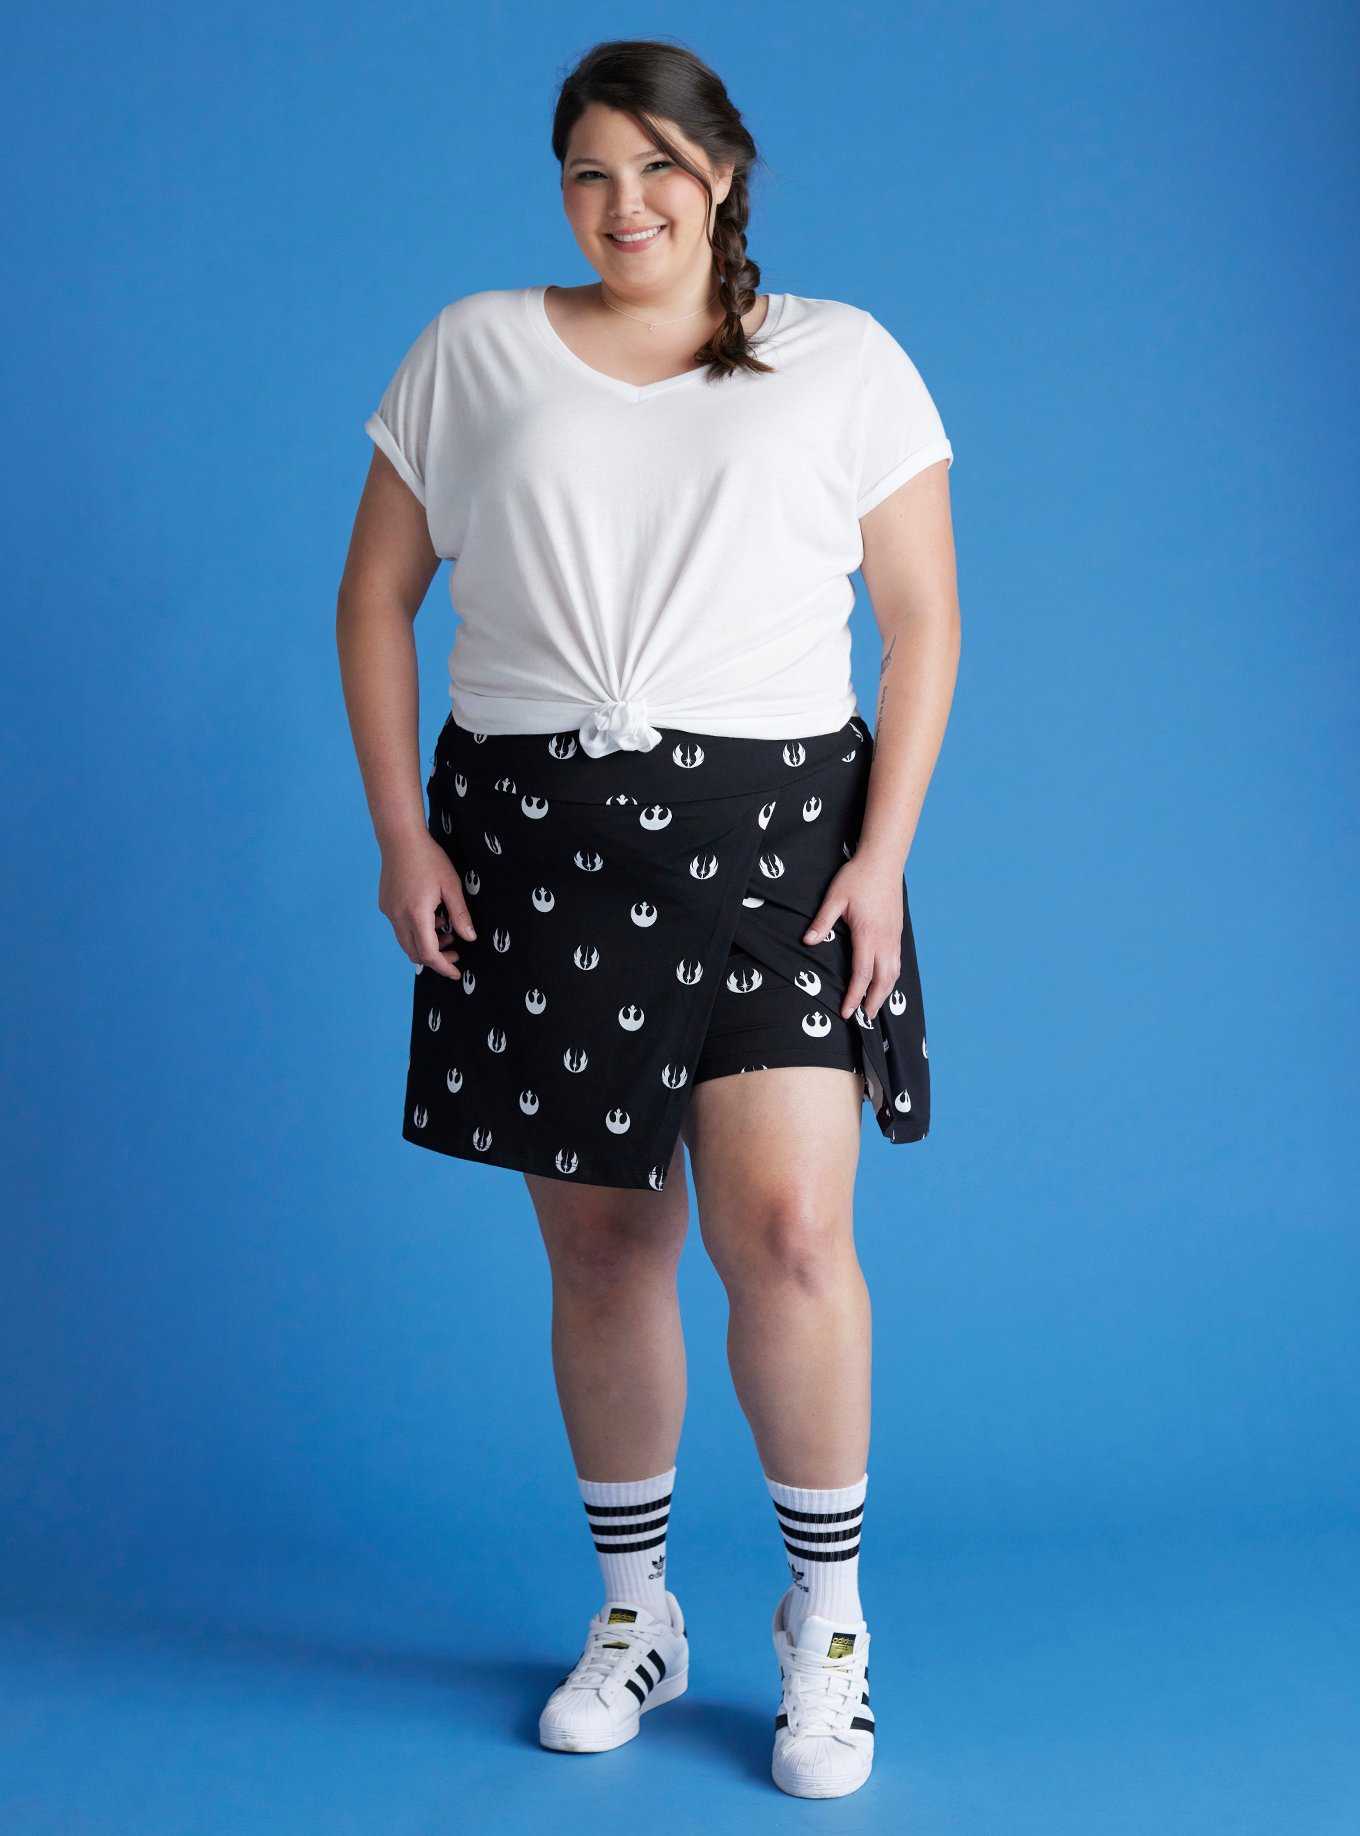 Her Universe Star Wars Icons Asymmetrical Athletic Skort Plus Size Her Universe Exclusive, , hi-res